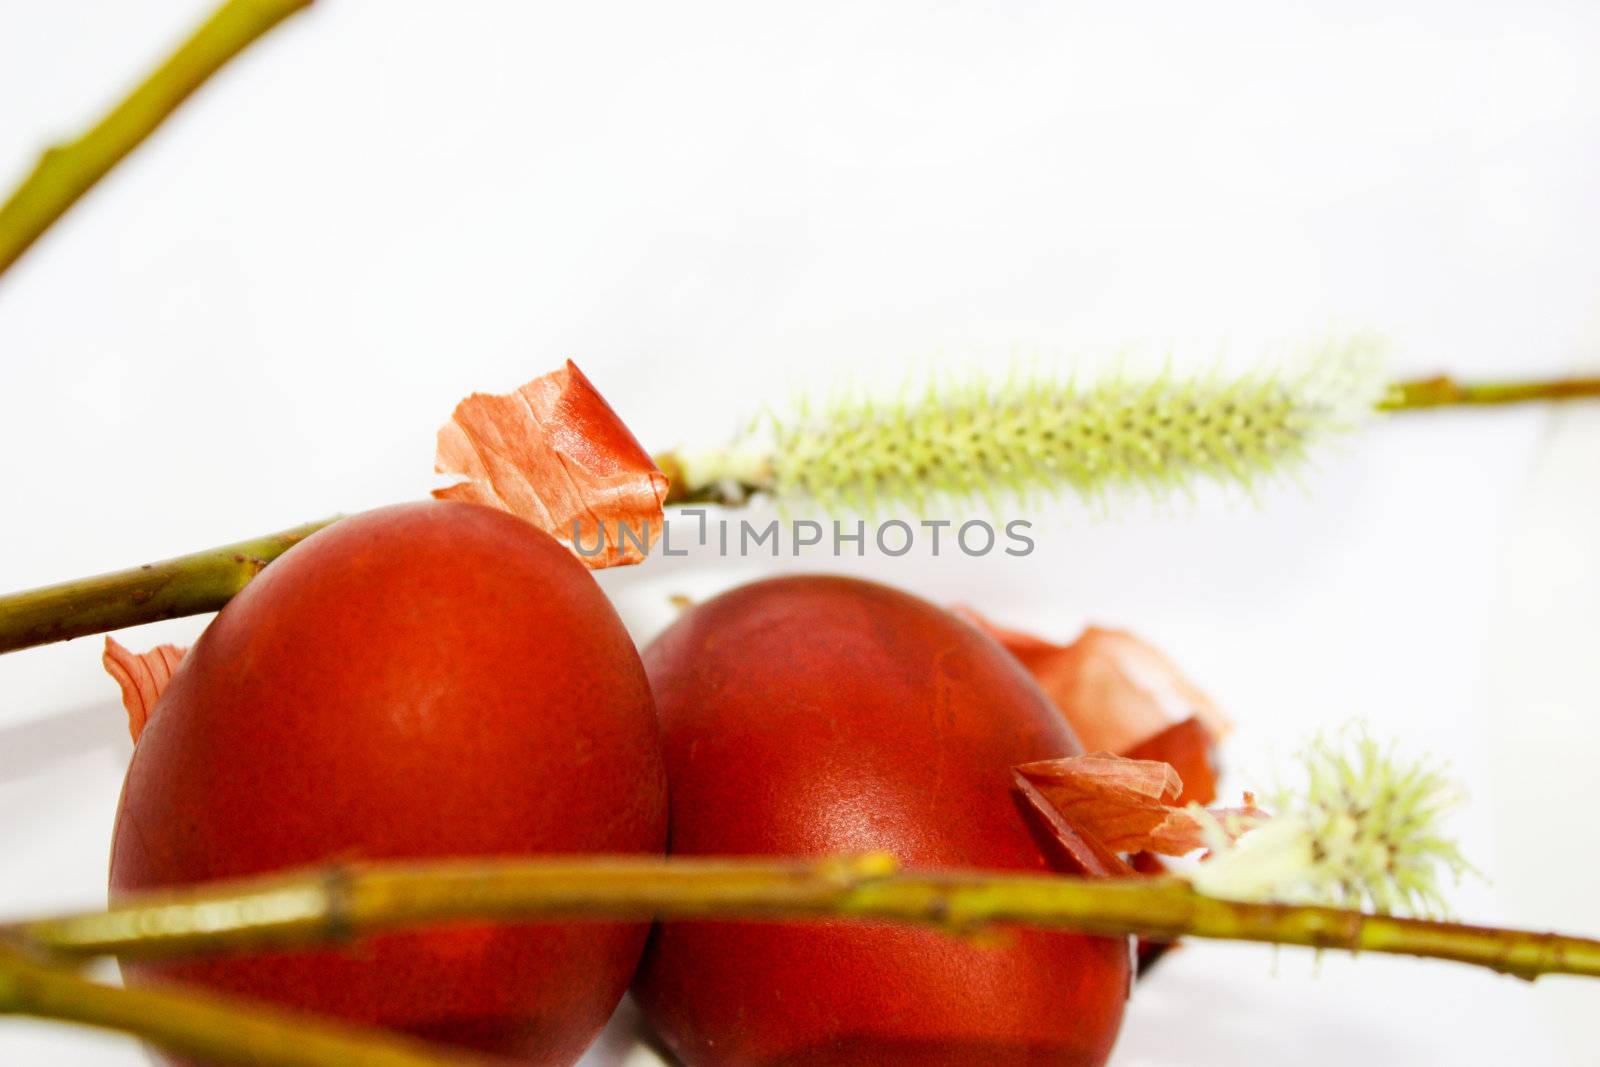 eggs, pussy-willow by Lyudmila